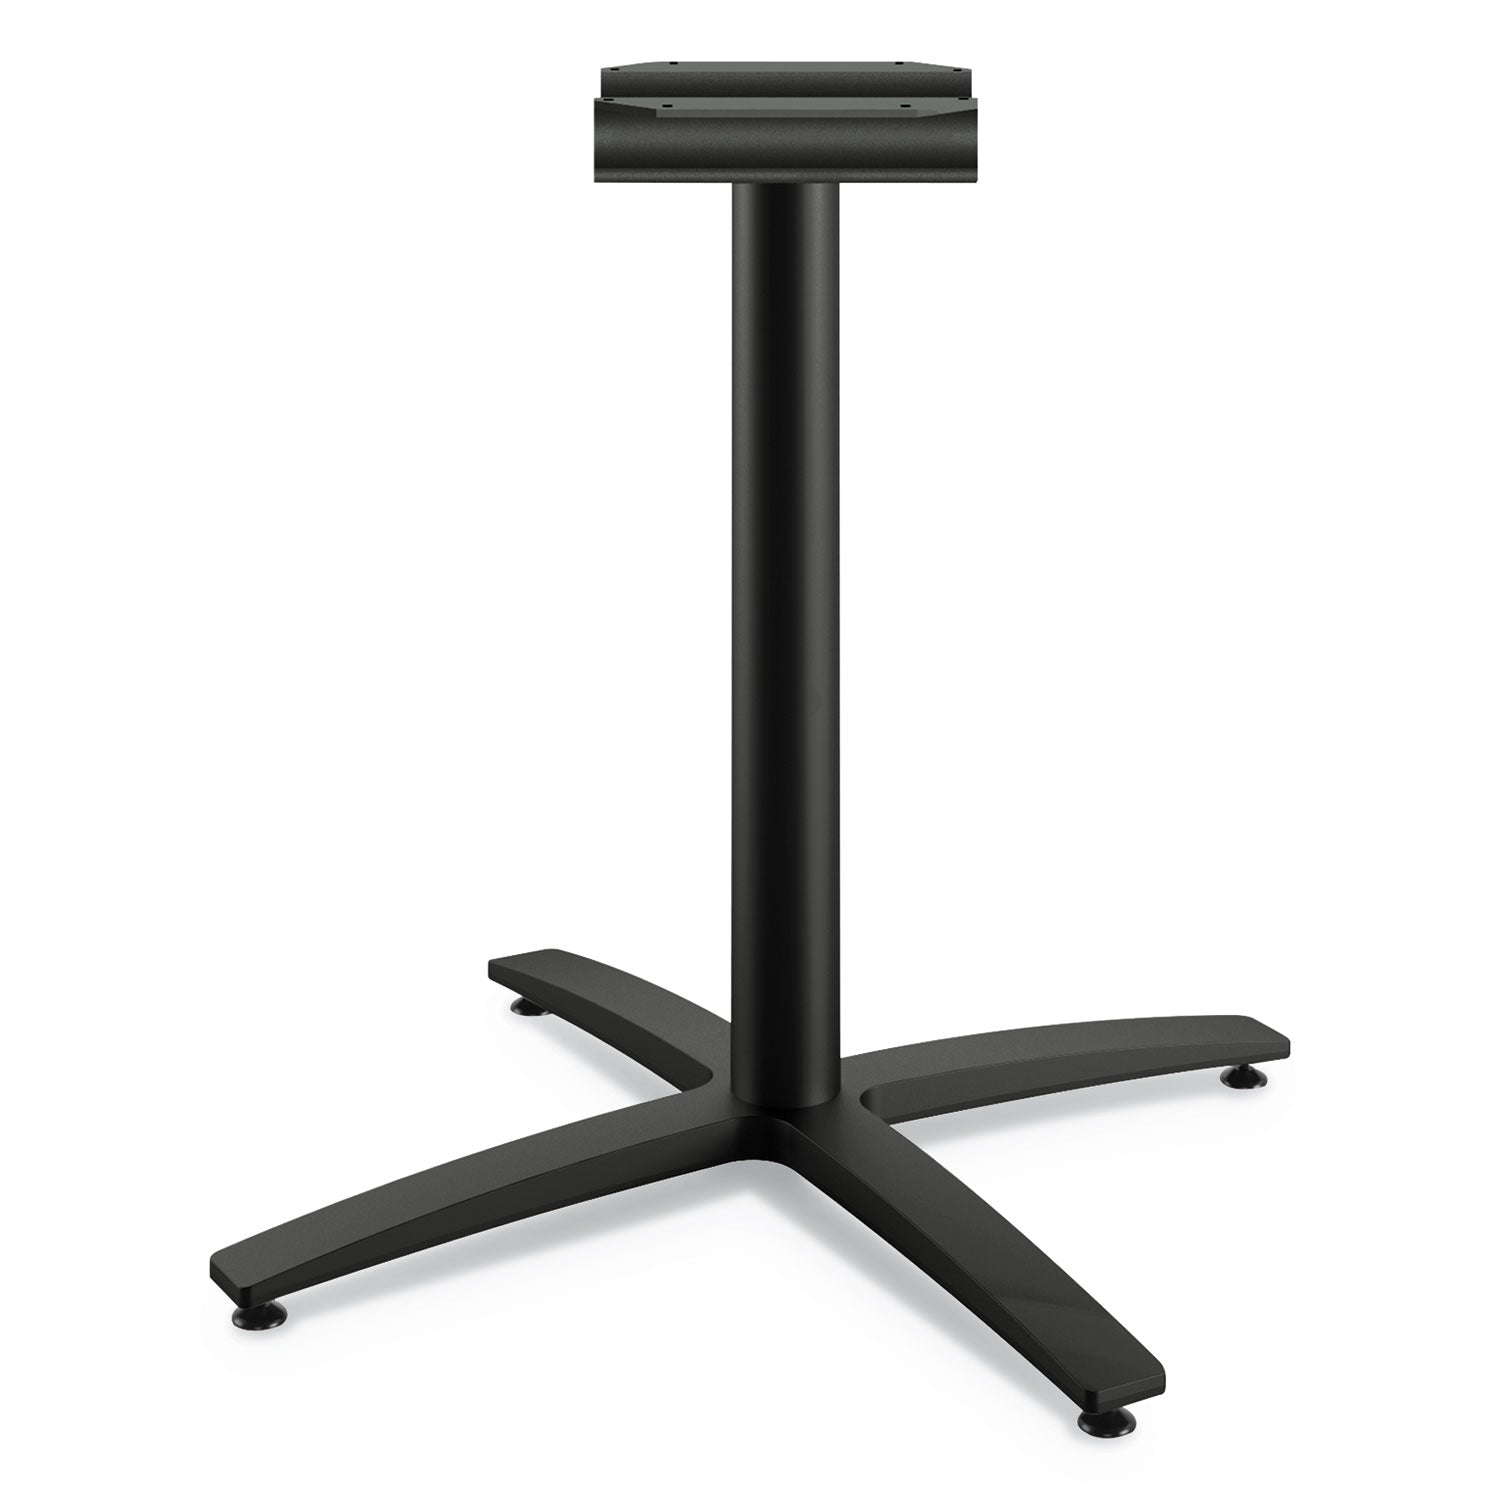 between-seated-height-x-base-for-30-to-36-table-tops-2618w-x-2957h-black_honbtx30scbk - 1